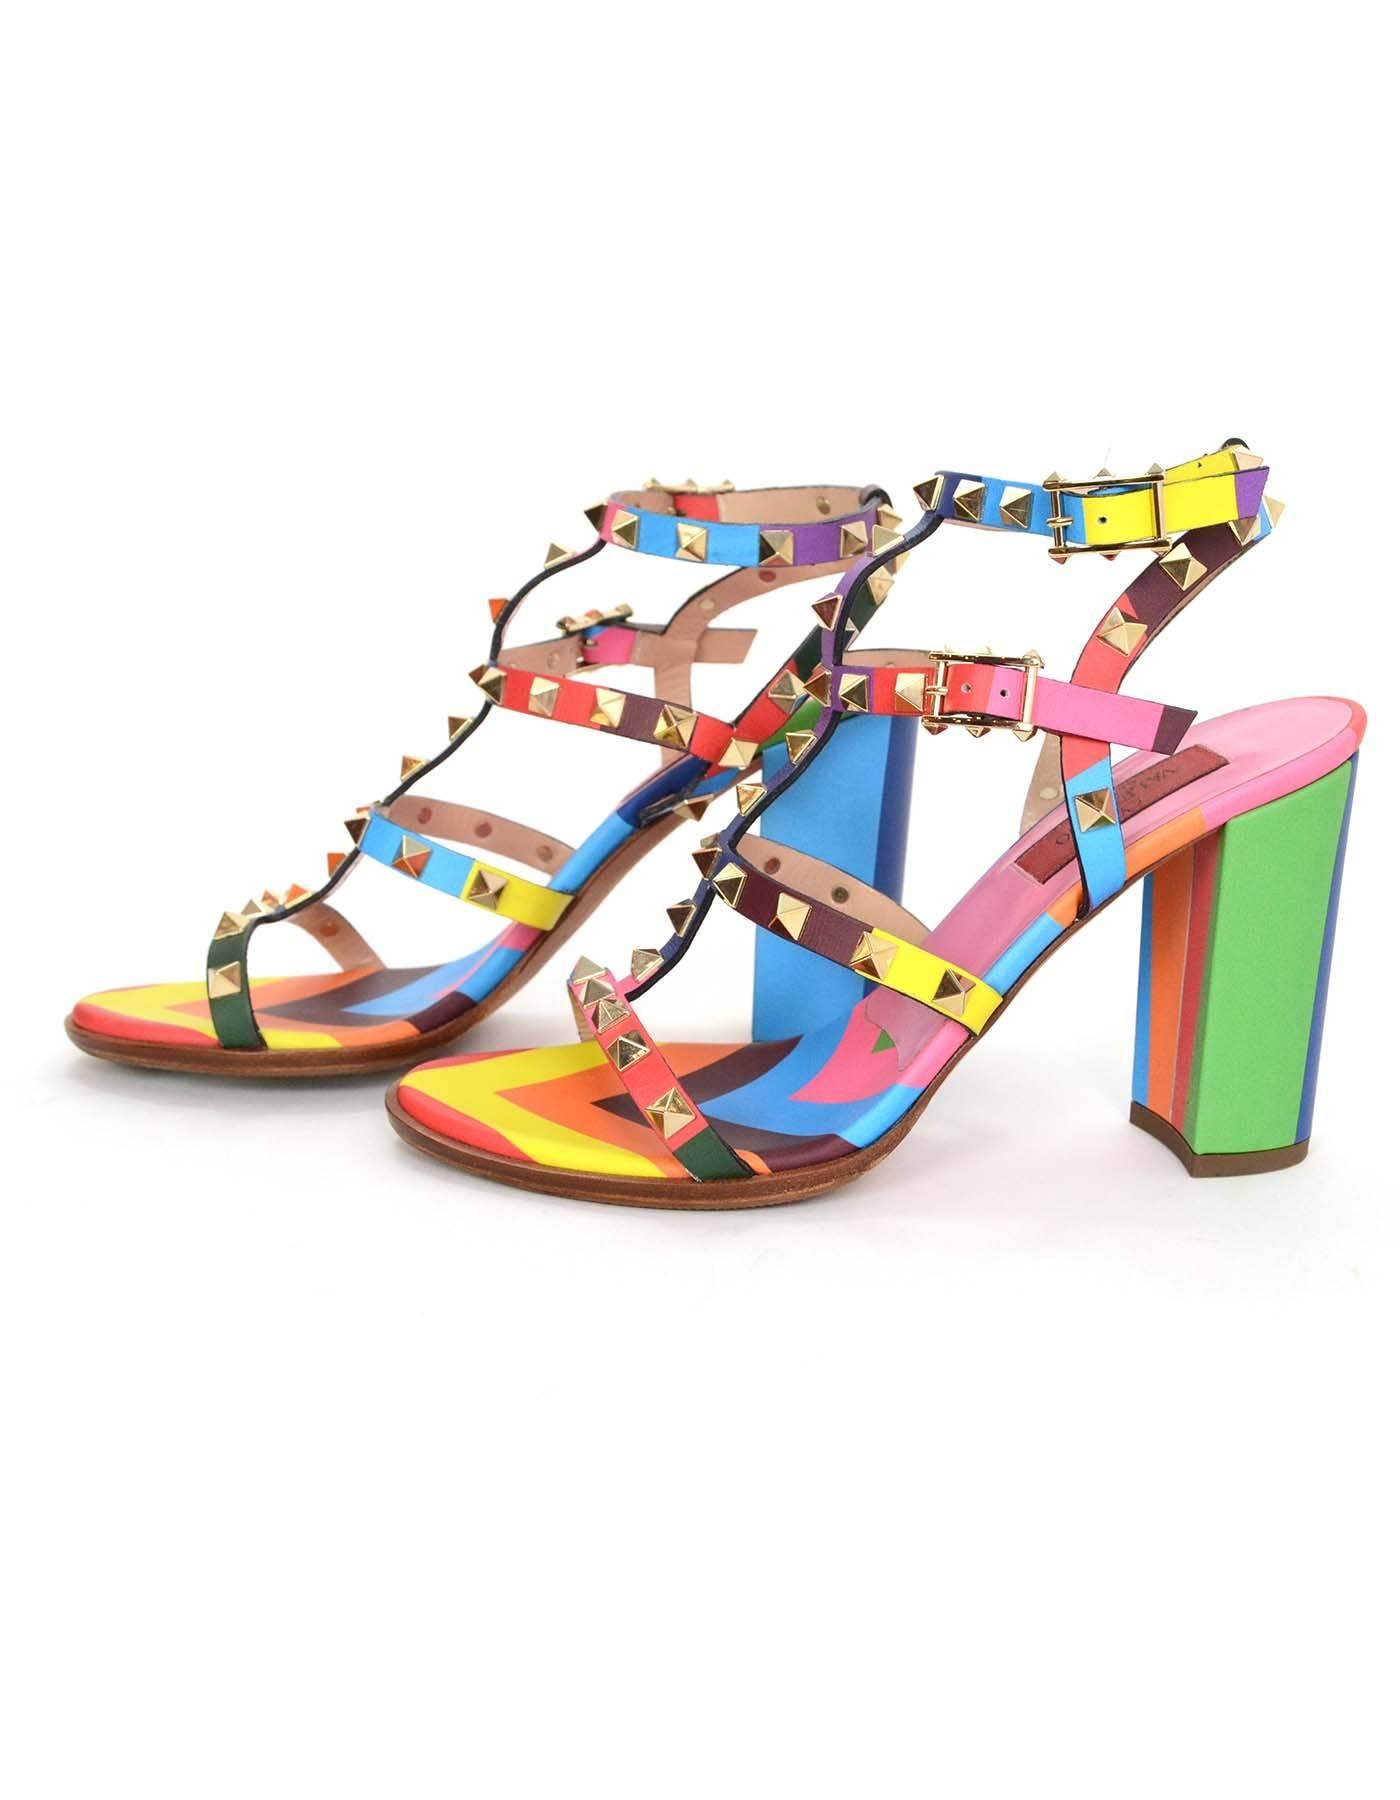 Valentino Rainbow Leather Rockstud City Sandals 
Made In: Italy
Color: Multi-colored
Hardware: Goldtone
Materials: Leather and metal
Closure/Opening: Ankle straps with buckle and notch closures
Sole Stamp: Valentino Garavani Made in Italy